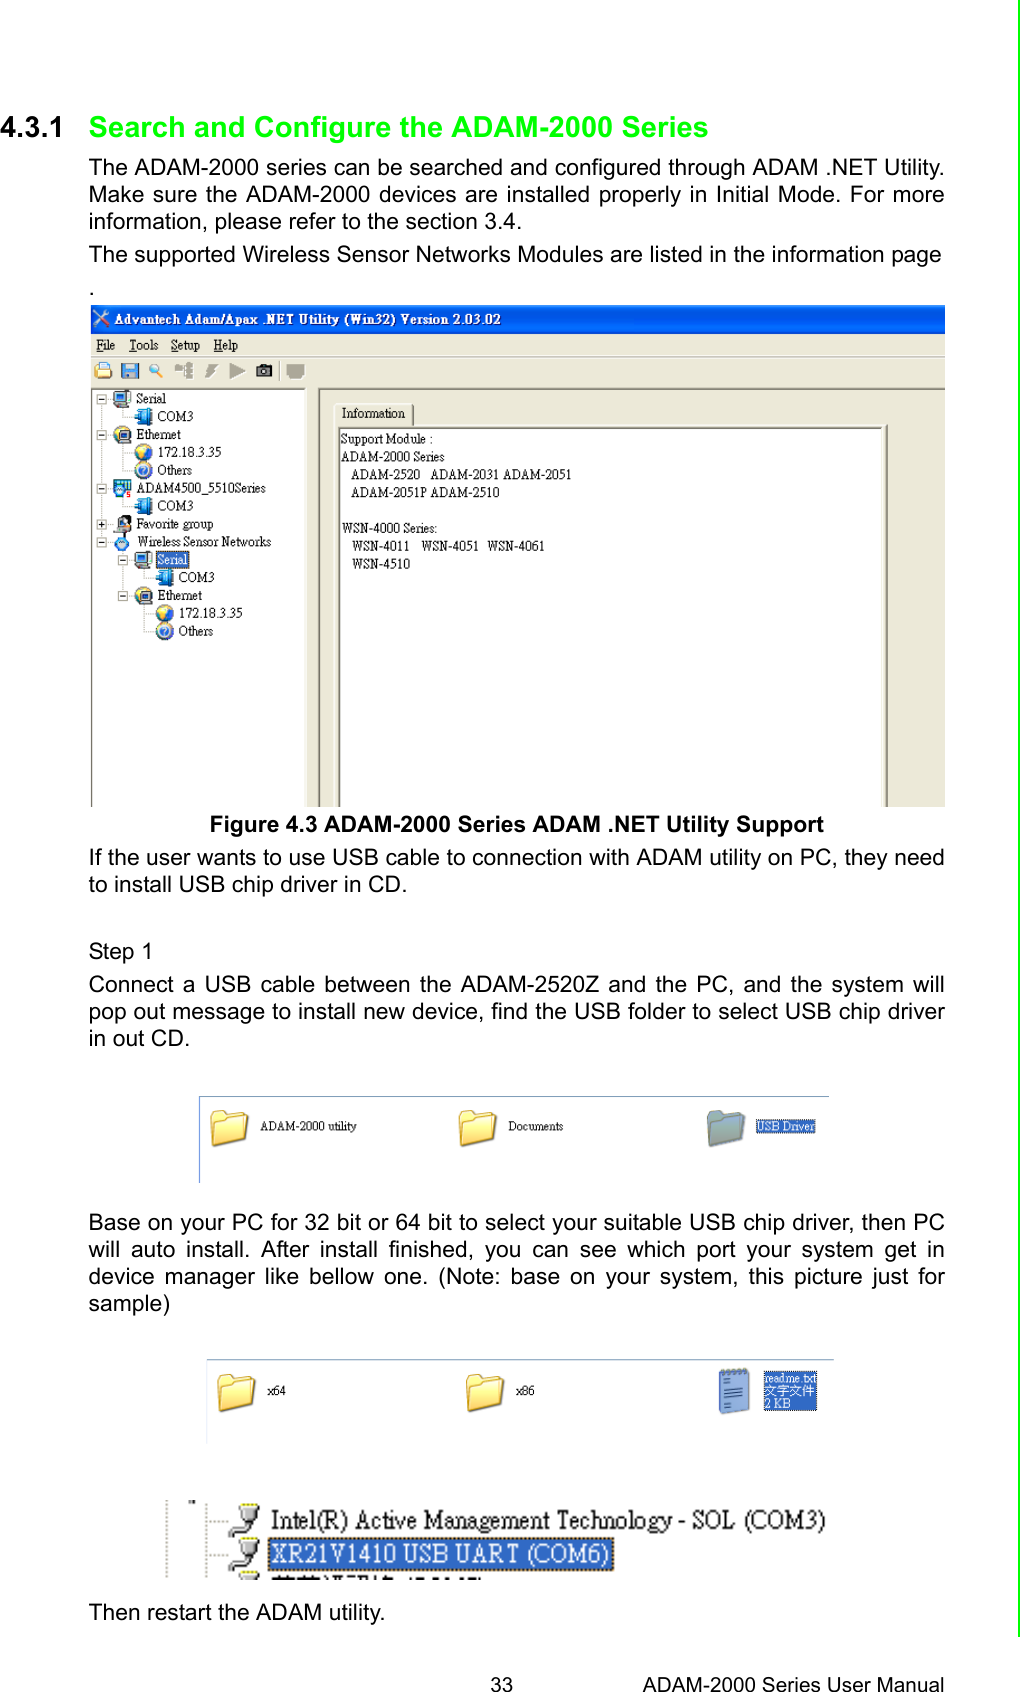 33 ADAM-2000 Series User ManualChapter 4 Software Configuration Guide4.3.1 Search and Configure the ADAM-2000 SeriesThe ADAM-2000 series can be searched and configured through ADAM .NET Utility.Make sure the ADAM-2000 devices are installed properly in Initial Mode. For moreinformation, please refer to the section 3.4.The supported Wireless Sensor Networks Modules are listed in the information page.Figure 4.3 ADAM-2000 Series ADAM .NET Utility SupportIf the user wants to use USB cable to connection with ADAM utility on PC, they needto install USB chip driver in CD. Step 1Connect a USB cable between the ADAM-2520Z and the PC, and the system willpop out message to install new device, find the USB folder to select USB chip driverin out CD. Base on your PC for 32 bit or 64 bit to select your suitable USB chip driver, then PCwill auto install. After install finished, you can see which port your system get indevice manager like bellow one. (Note: base on your system, this picture just forsample)    Then restart the ADAM utility.